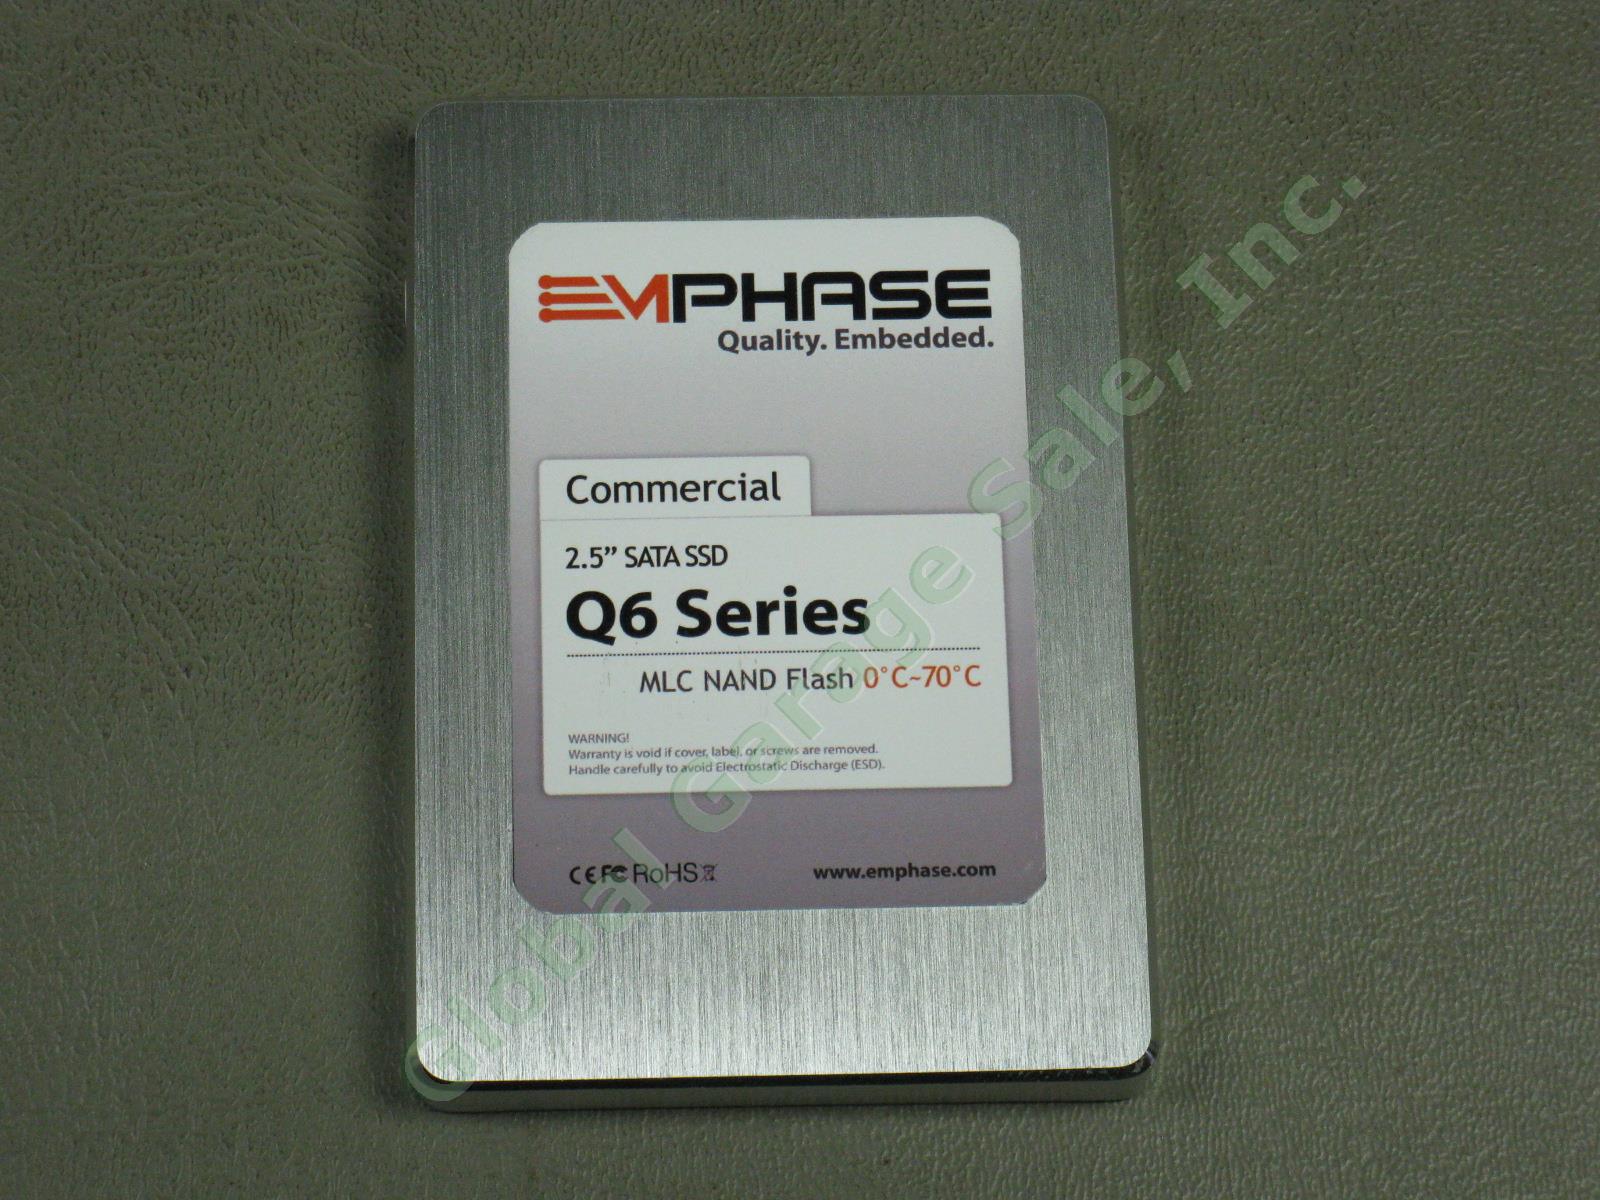 10 Emphase 60GB SSD SATA3 Q6 Commercial 2.5 MLC NAND Flash Solid State Drive Lot 2